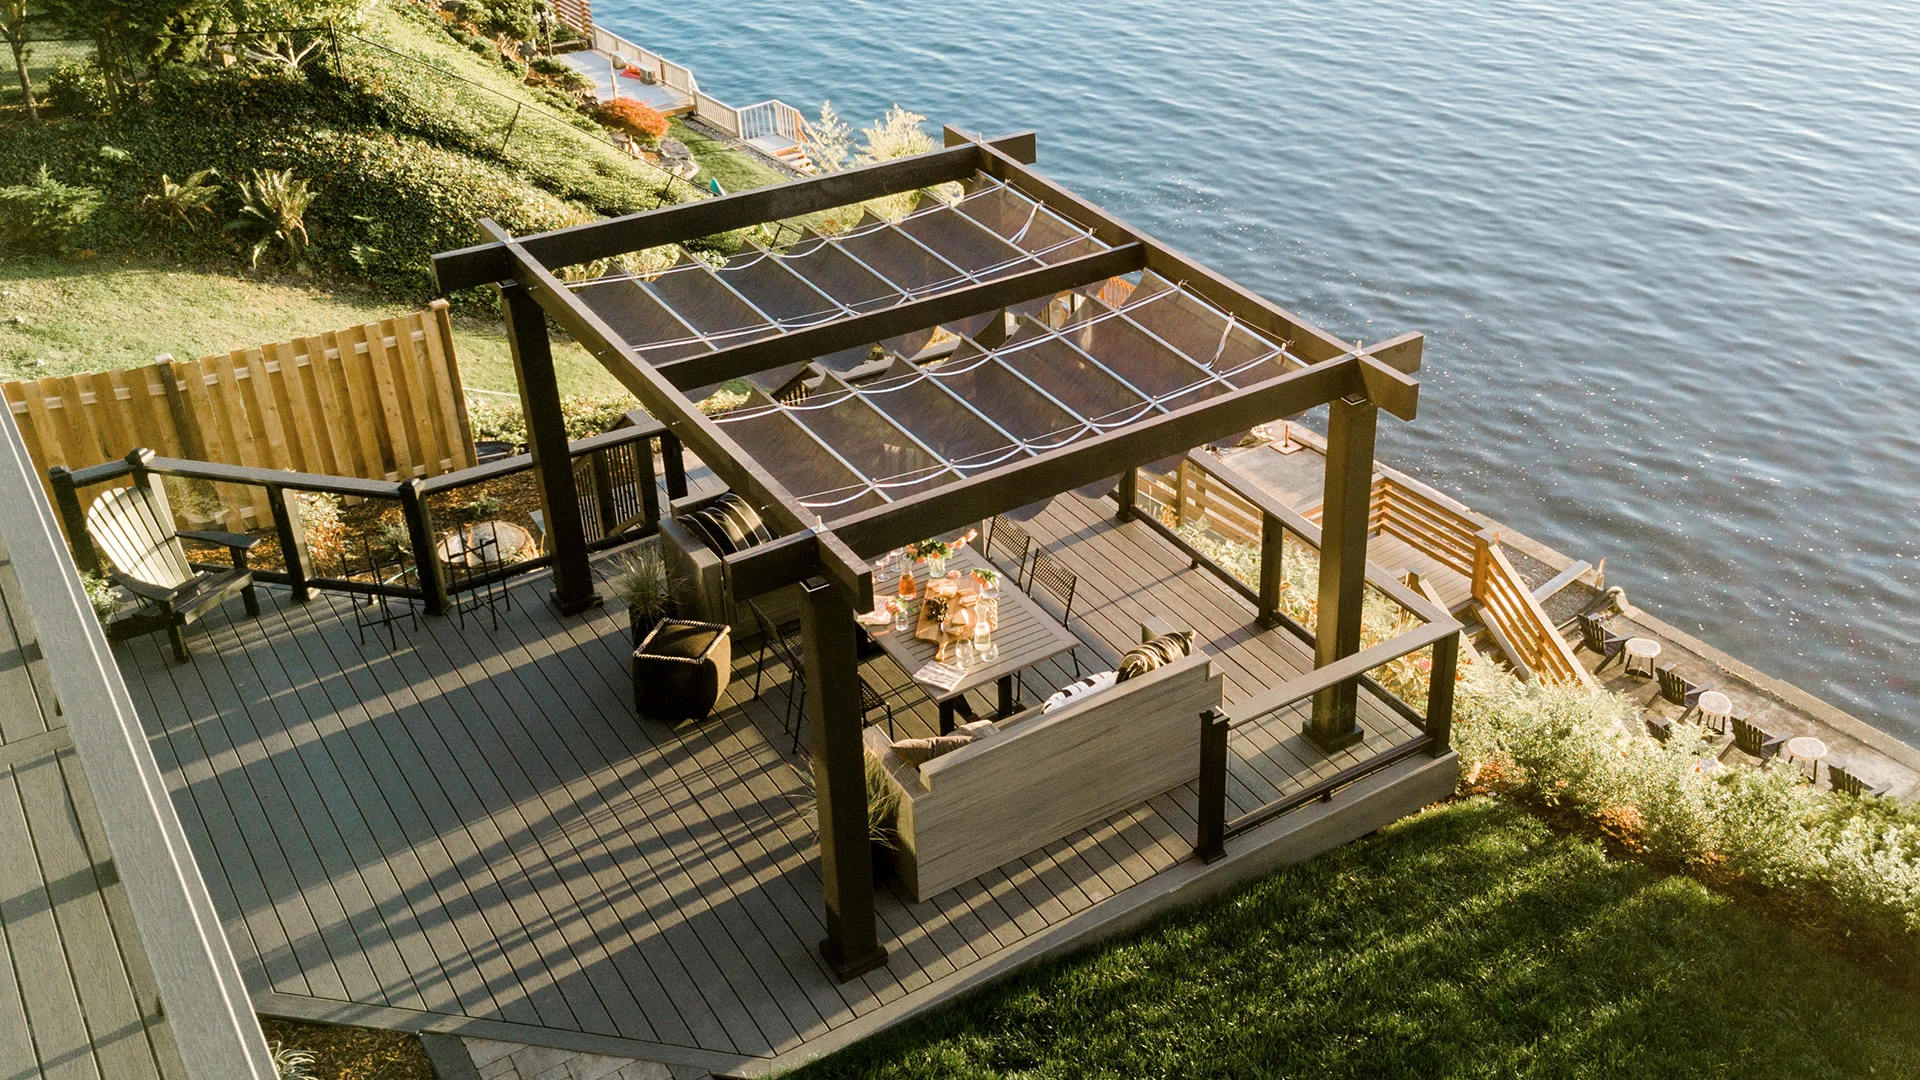 Featured image for “HGTV Dream Home in Gig Harbor Feat. Trex Pergola Vision”It’s that time of year again! The HGTV Dream Home sweepstakes is under way! This year you can day dream about a lake front home12319:full